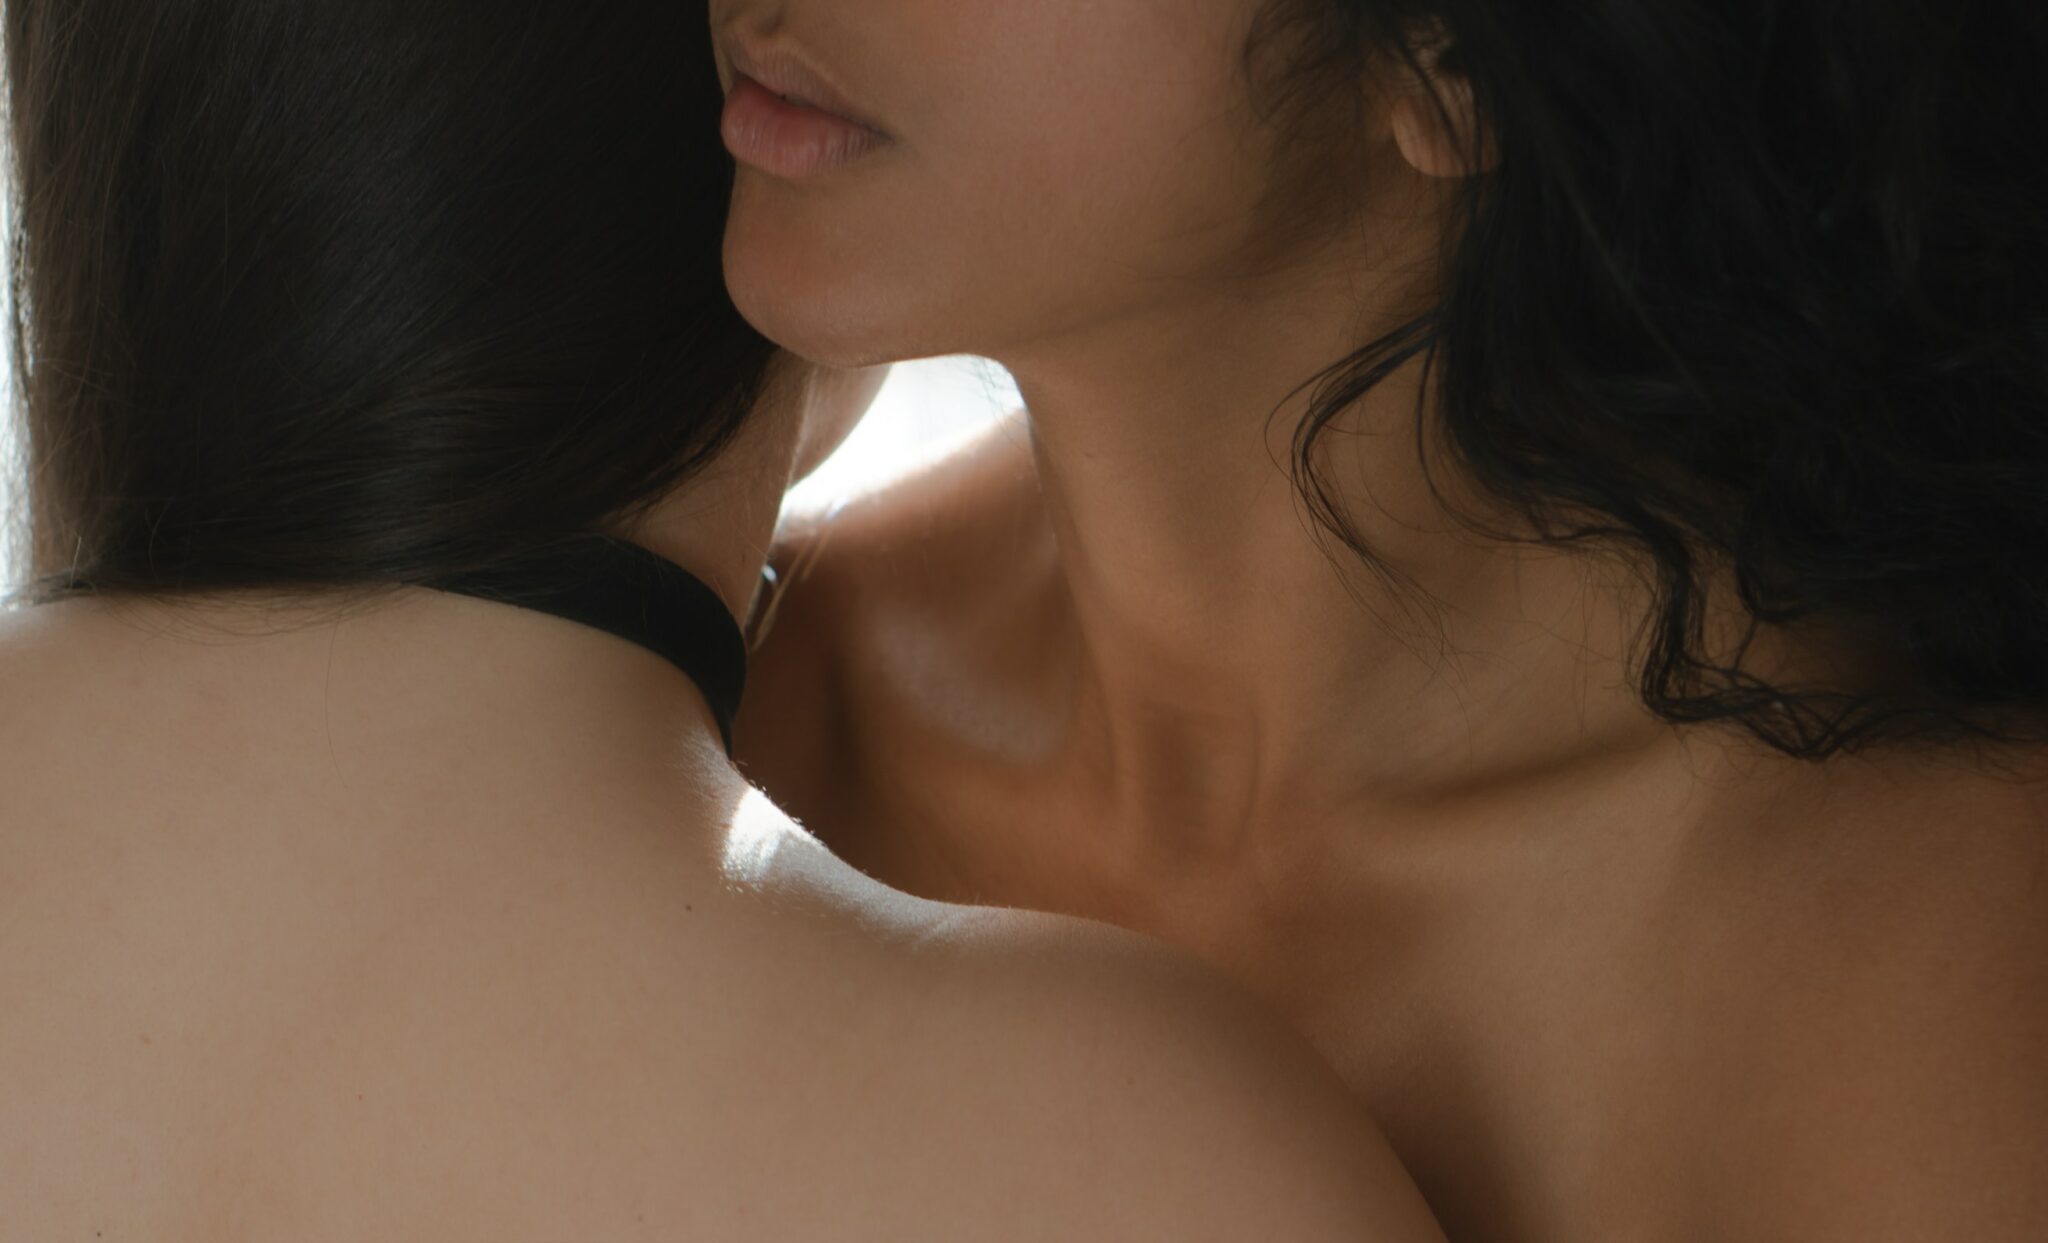 A close-up of a woman whispering in another woman's ear.